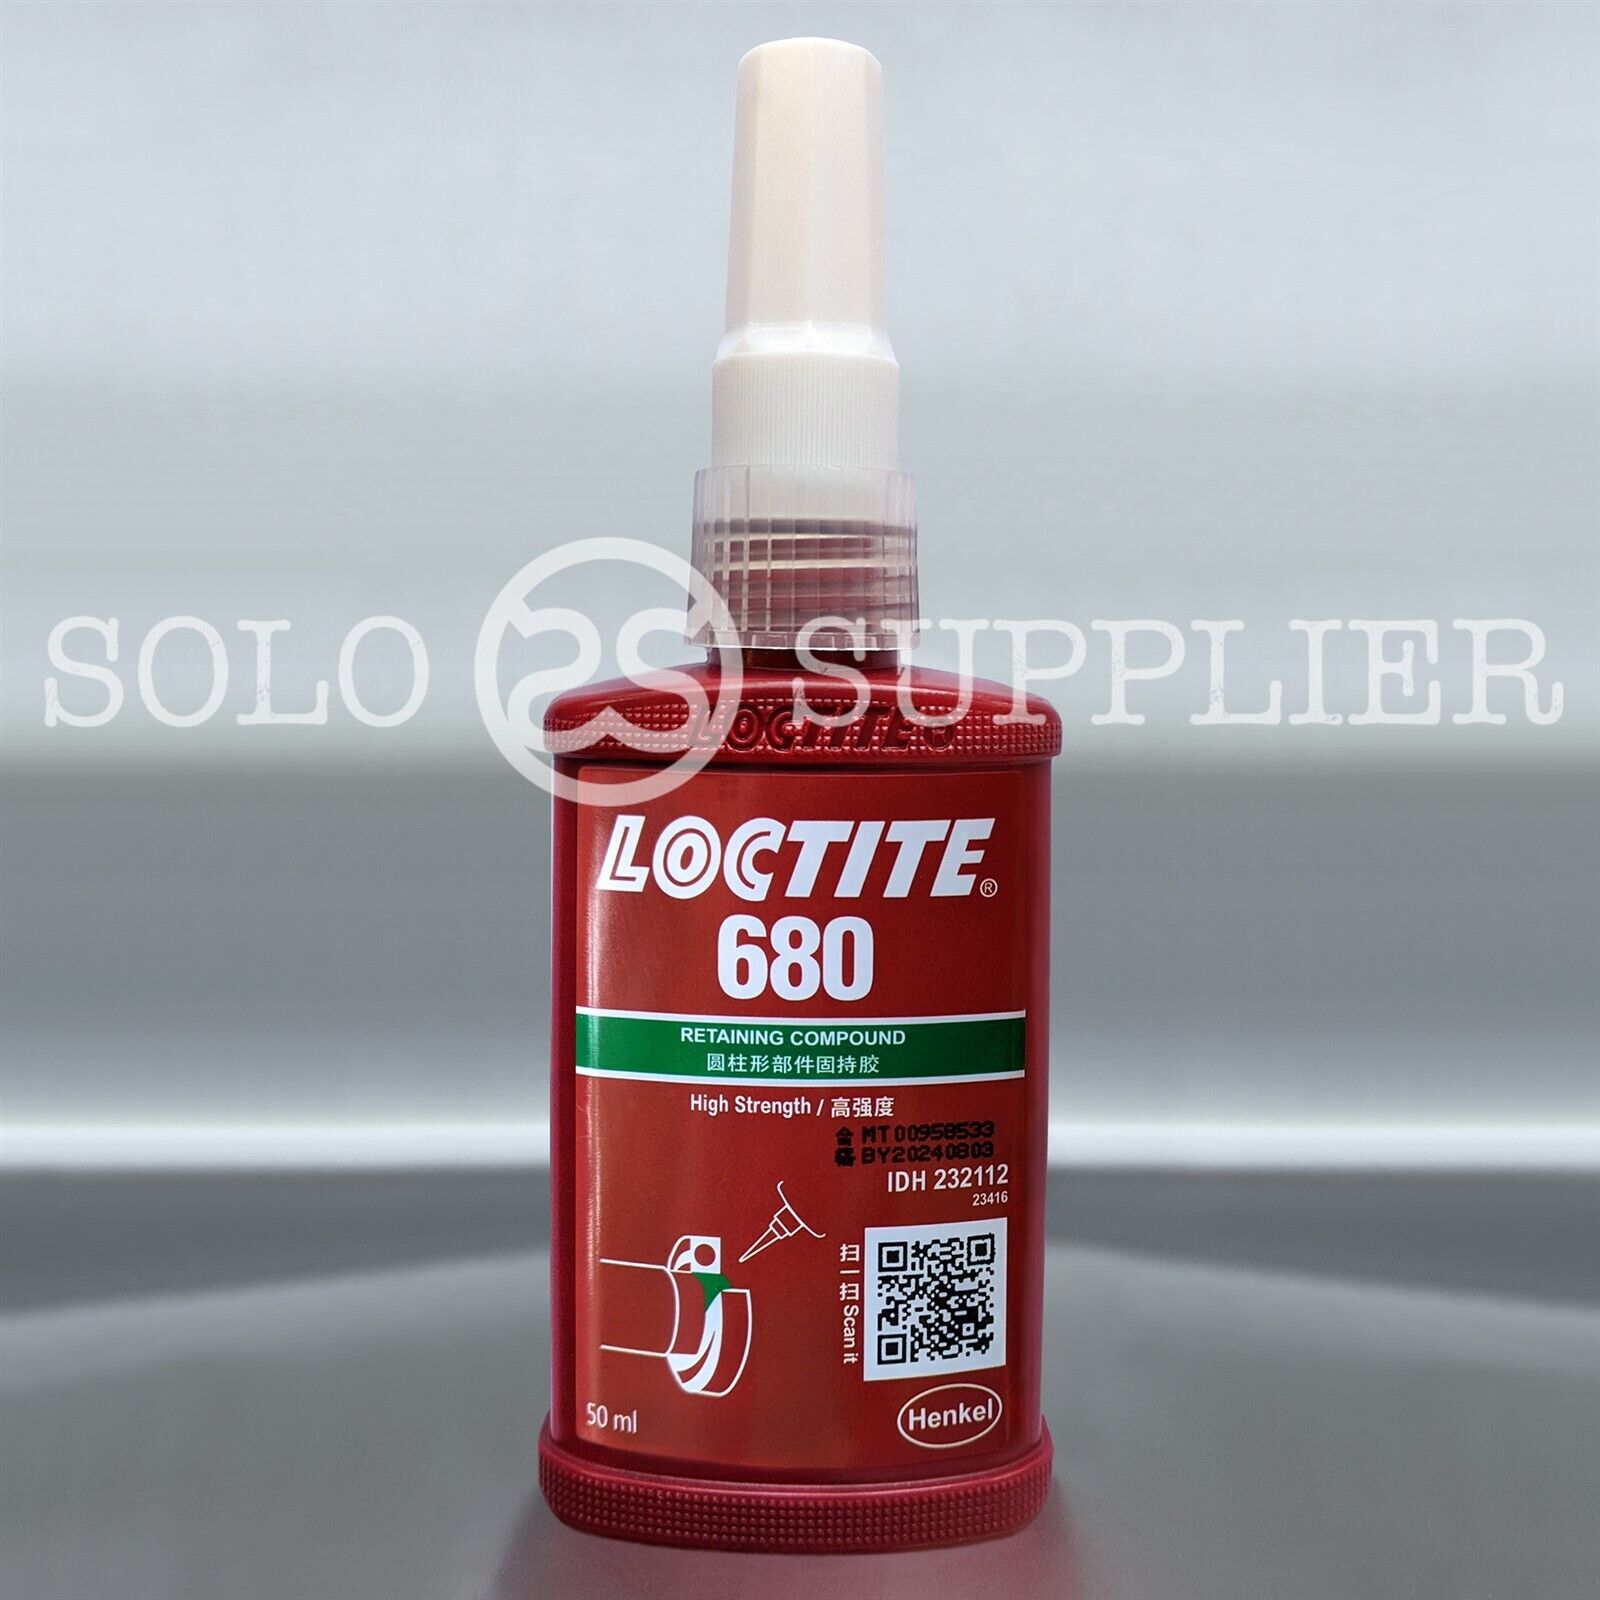 Loctite 680 Green High Strength Retaining Compound 50ml